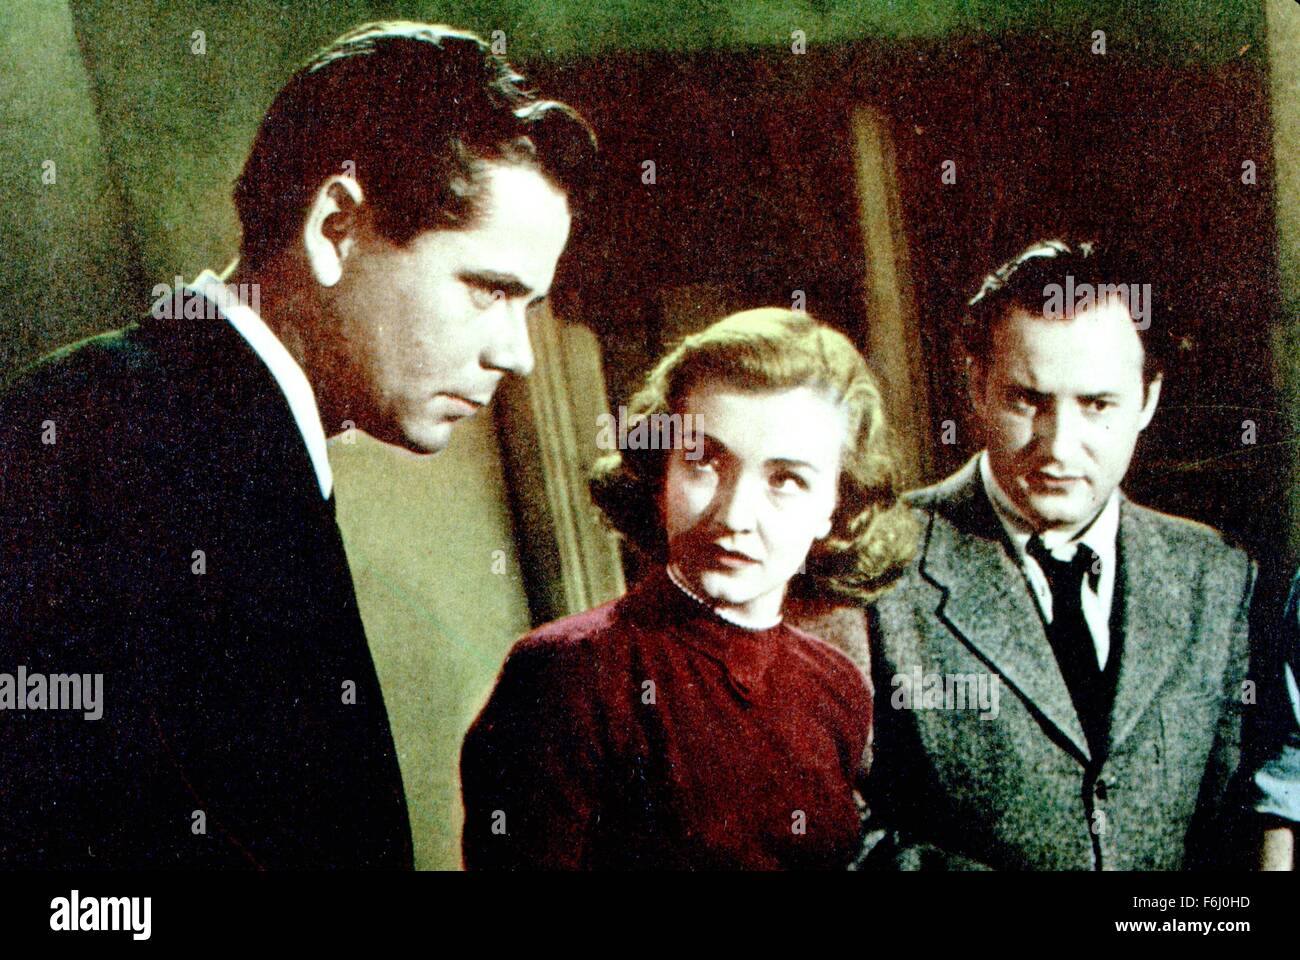 1949, Film Title: UNDERCOVER MAN, Director: JOSEPH H LEWIS, Studio: COLUMBIA, Pictured: NINA FOCH, GLENN FORD. (Credit Image: SNAP) Stock Photo